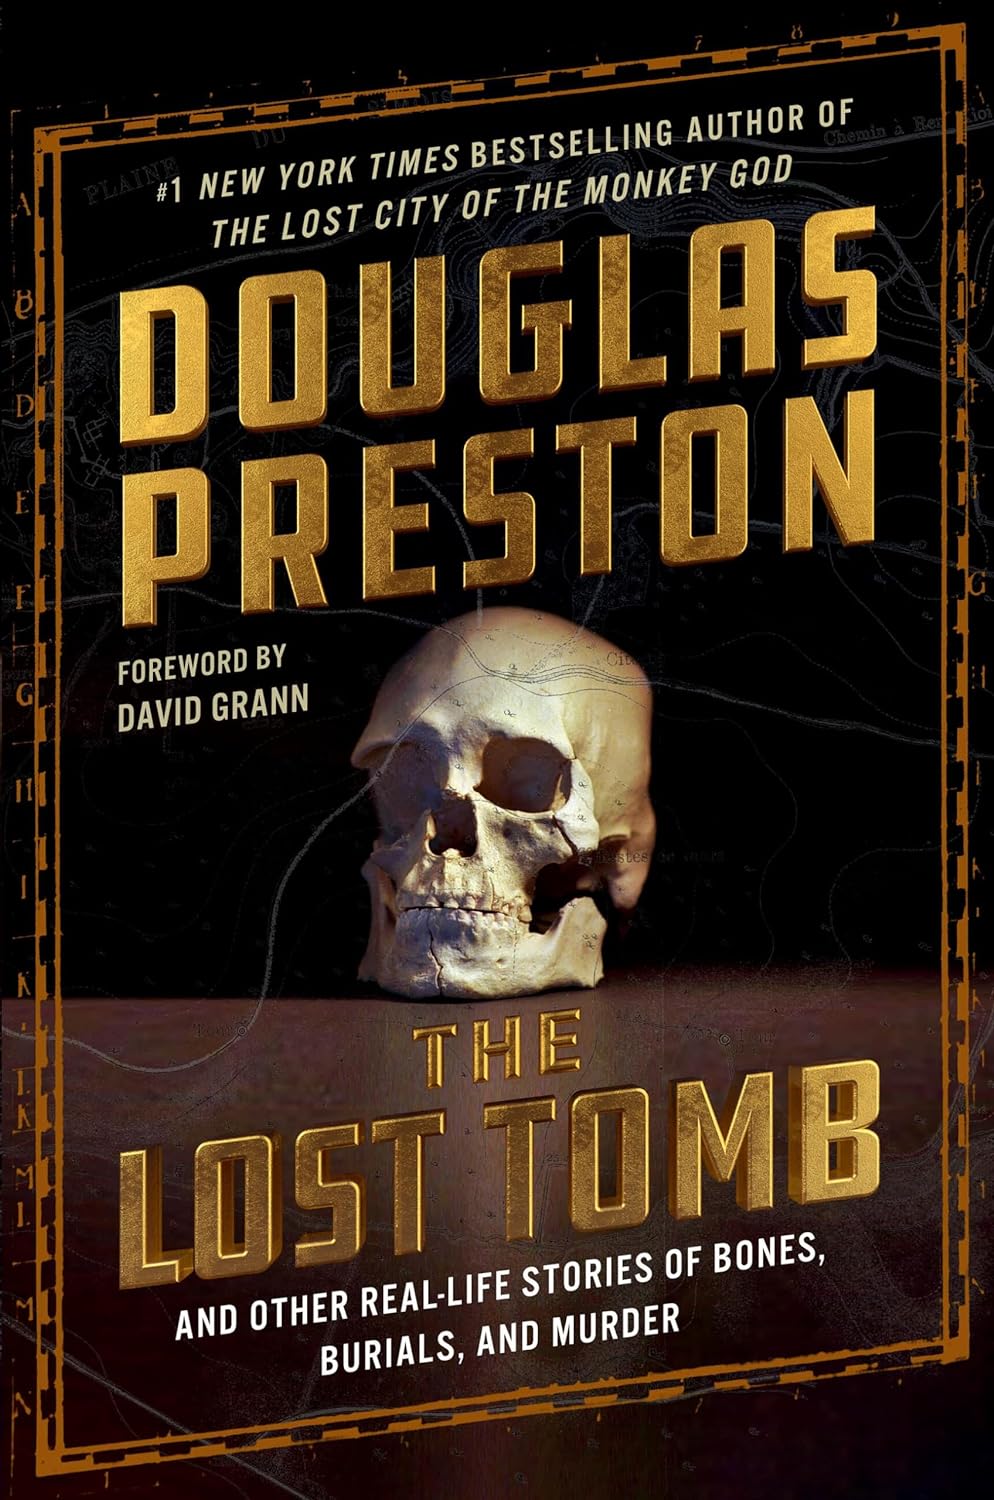 BOOK PRE-ORDER - The Lost Tomb: And Other Real-Life Stories of